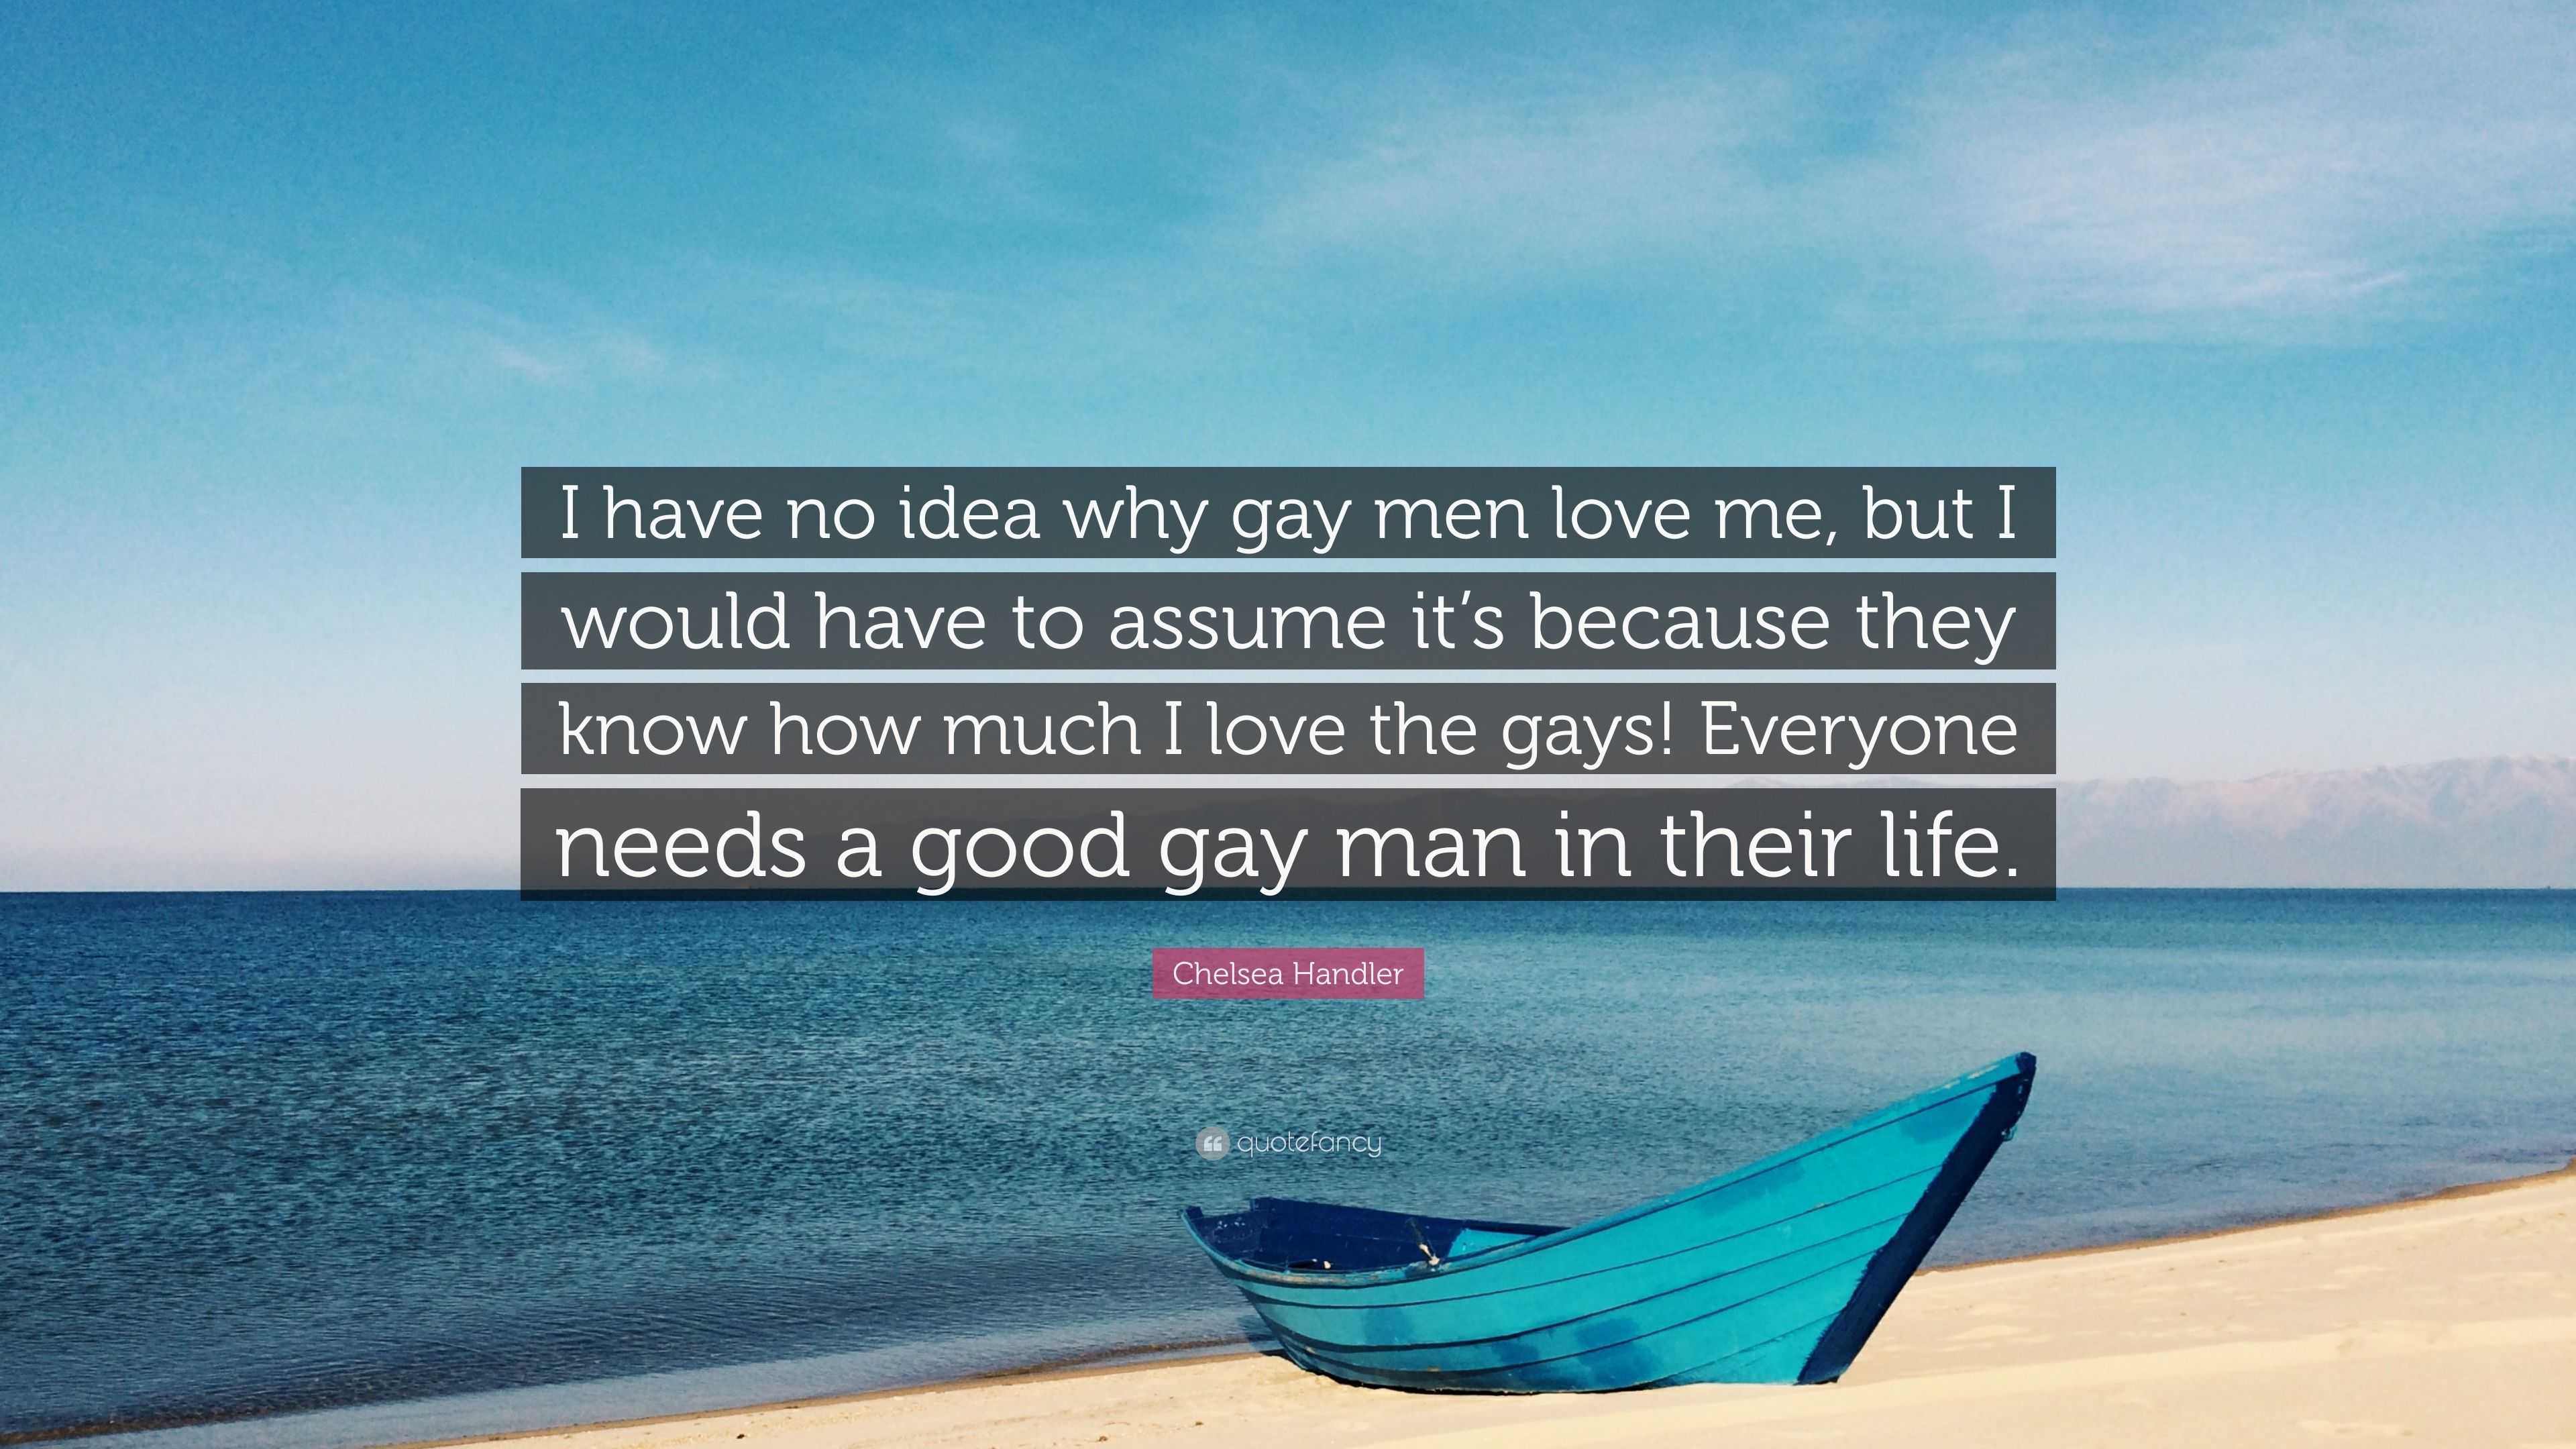 Chelsea Handler Quote “i Have No Idea Why Gay Men Love Me But I Would Have To Assume Its